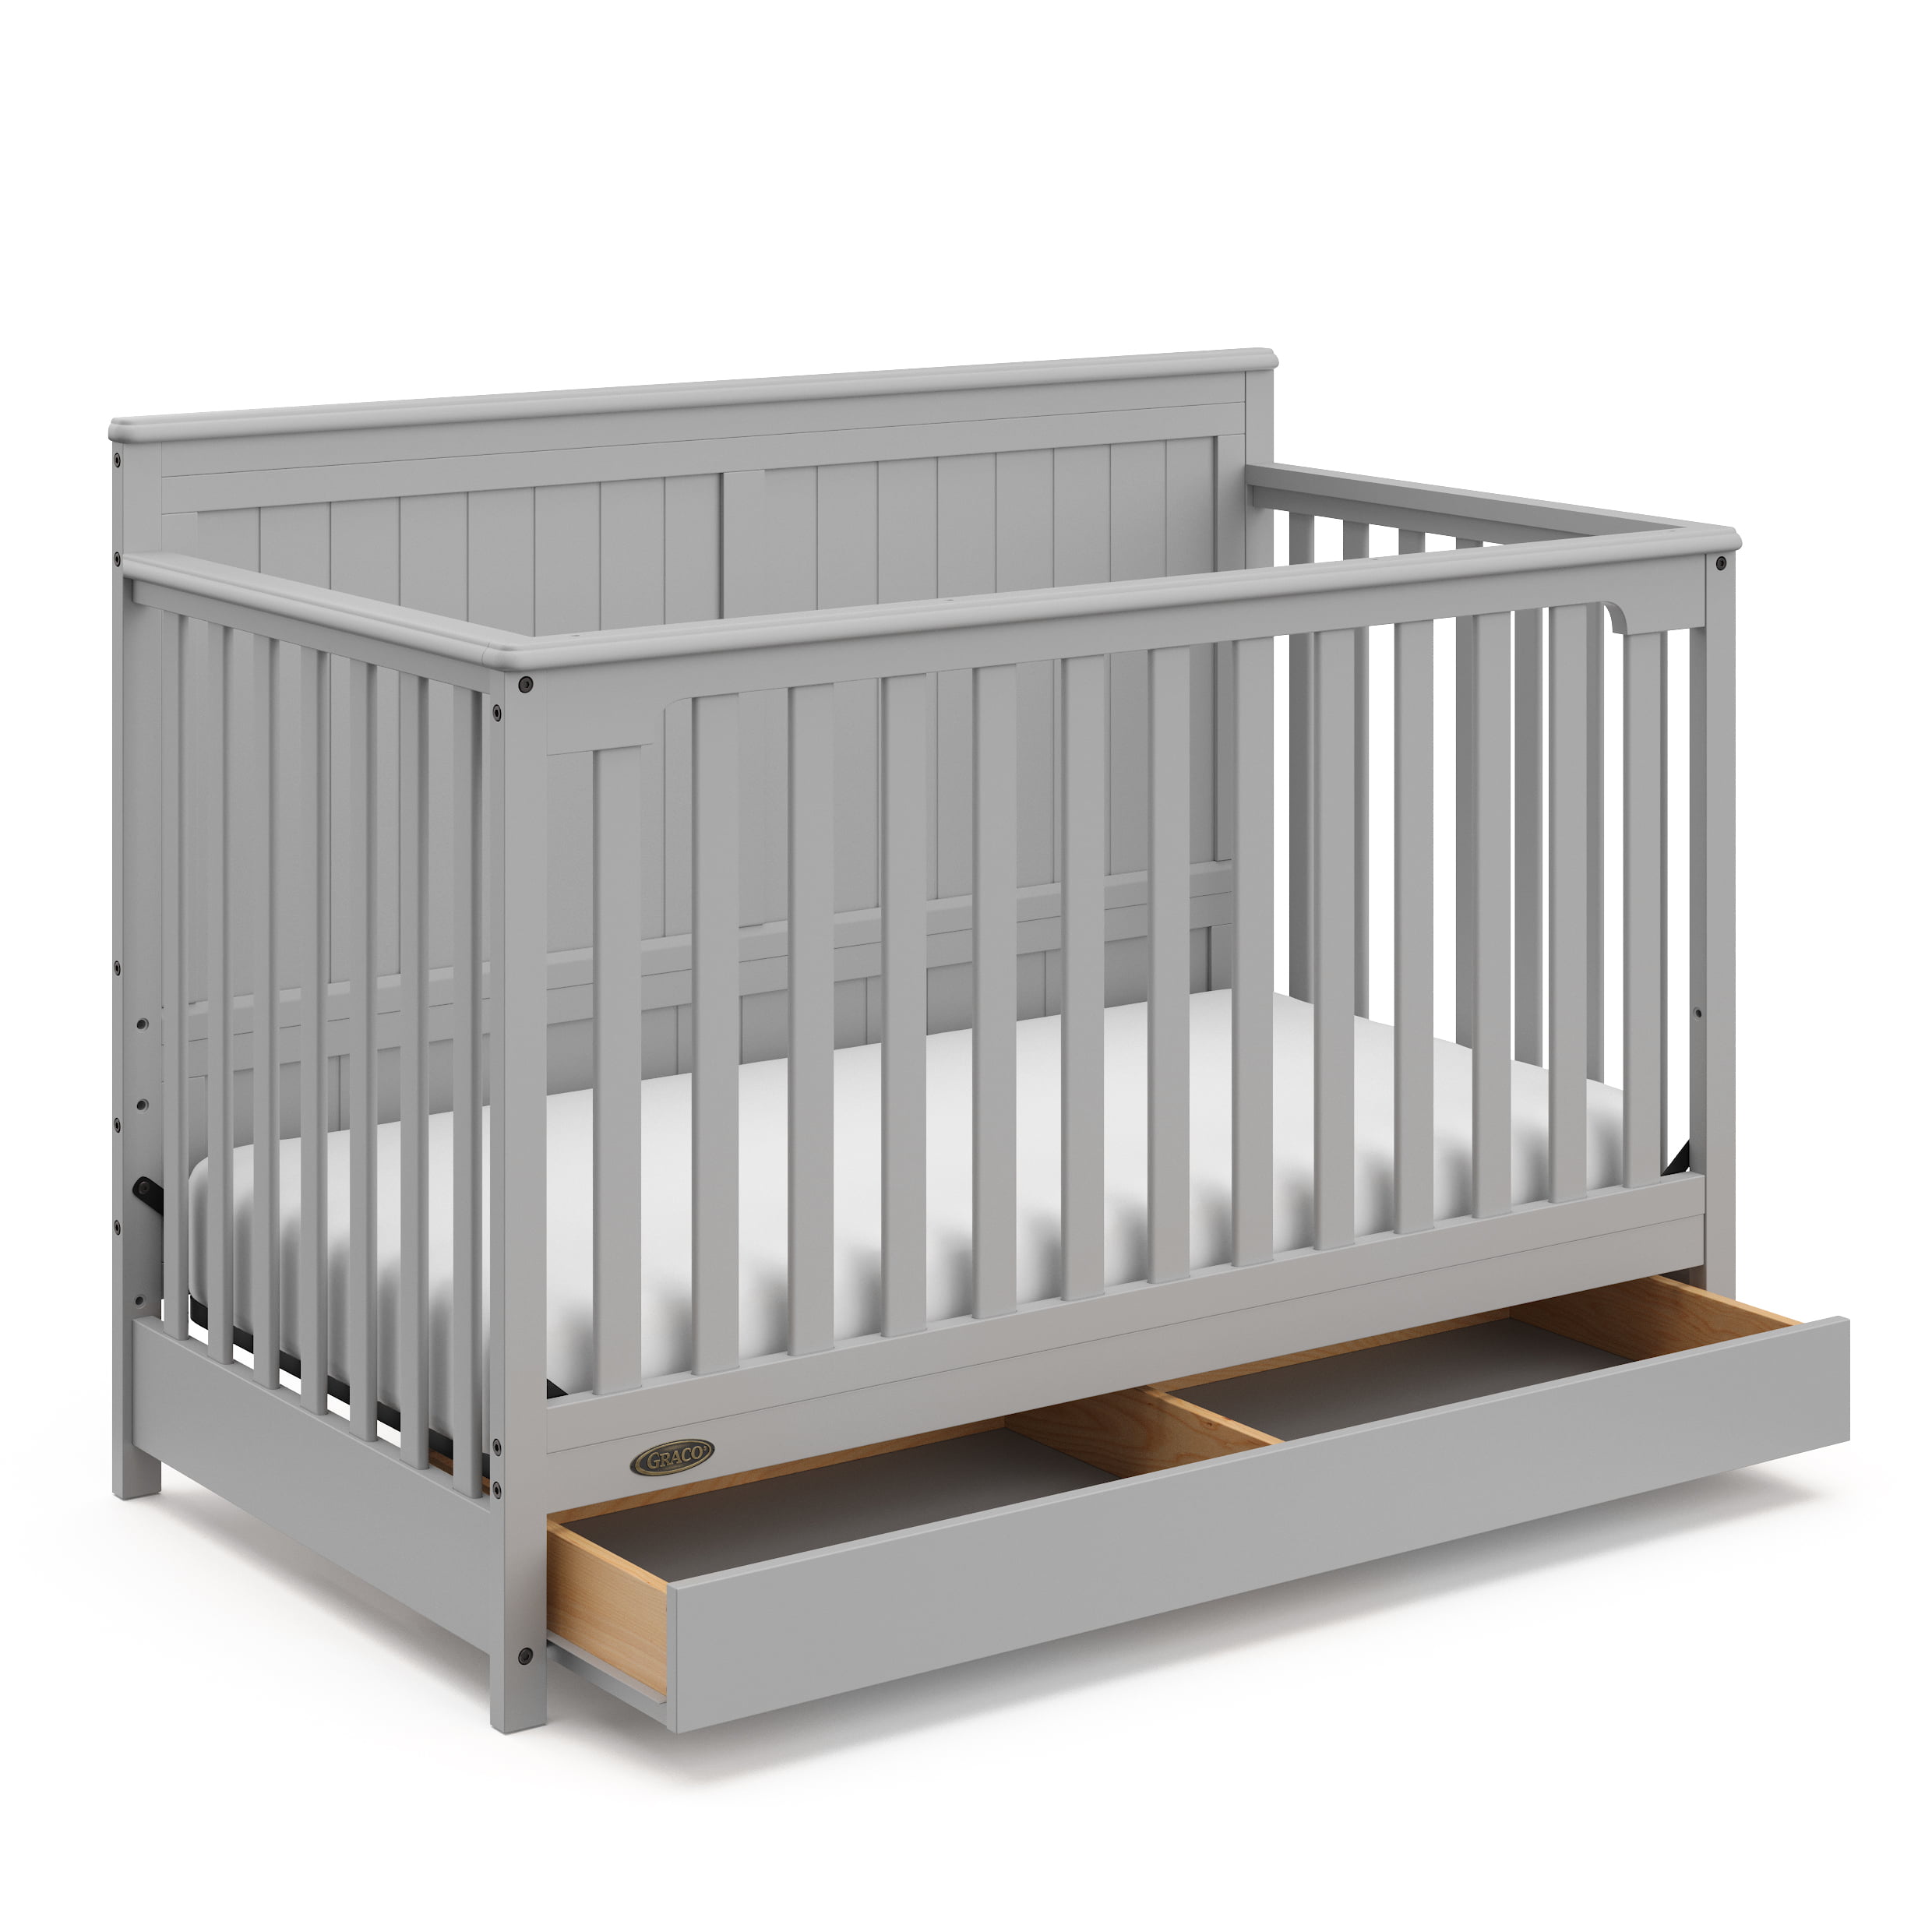 Cushi cots space saver cot bumper boys silver stars on white new 